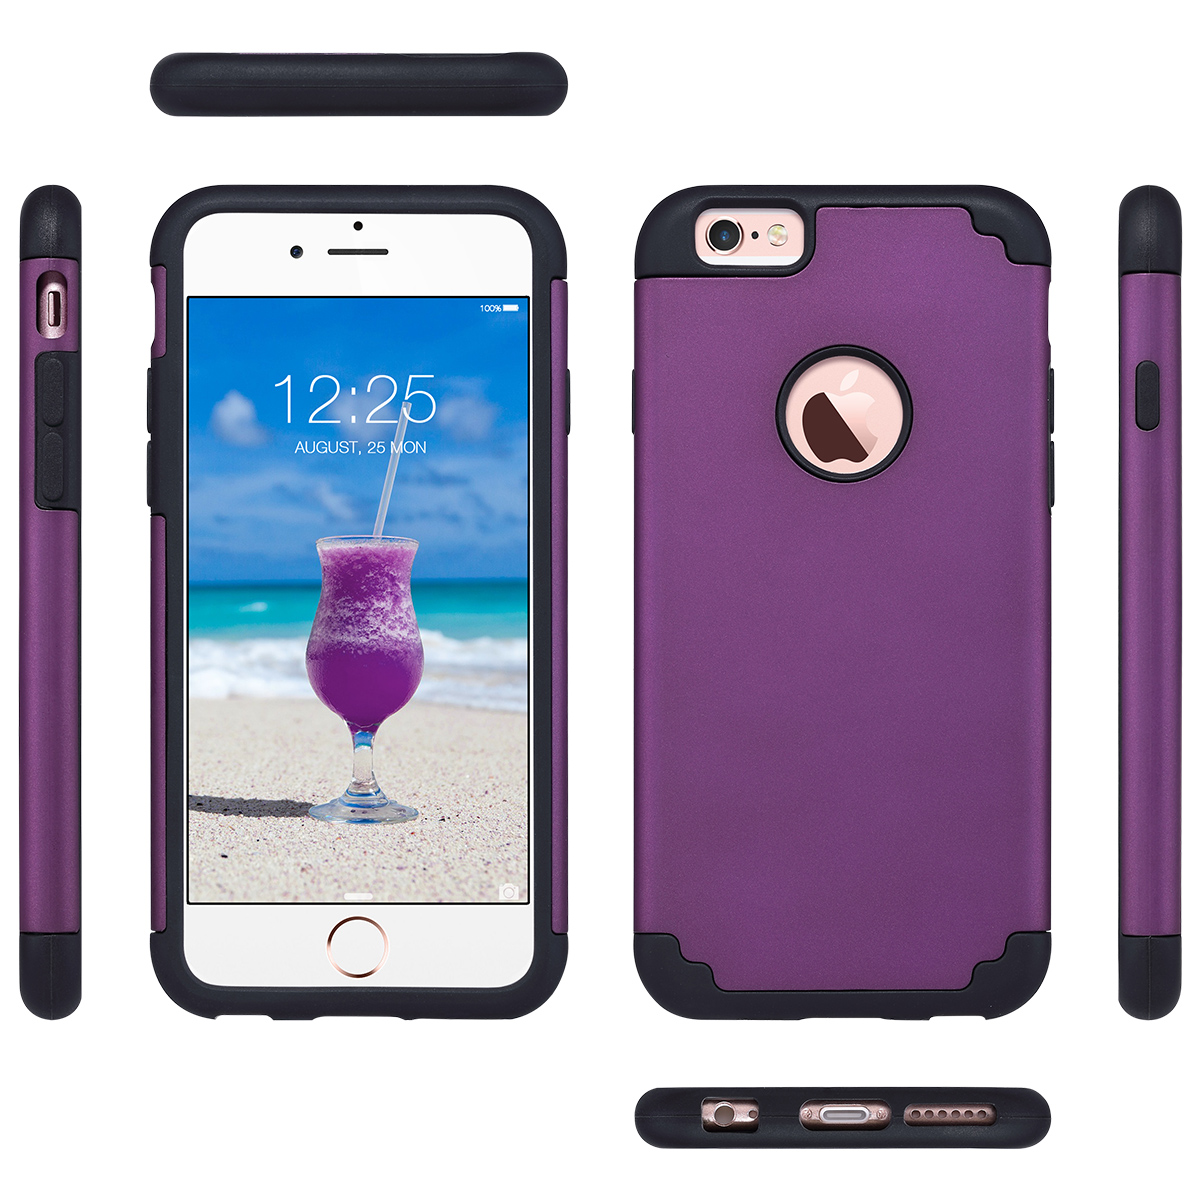 ULAK iPhone 6 Case, iPhone 6S Case, Slim Dual Layer Shockproof Bumper Phone Case for Apple iPhone 6 / 6s for Girls Women, Dark Purple Black - image 4 of 7